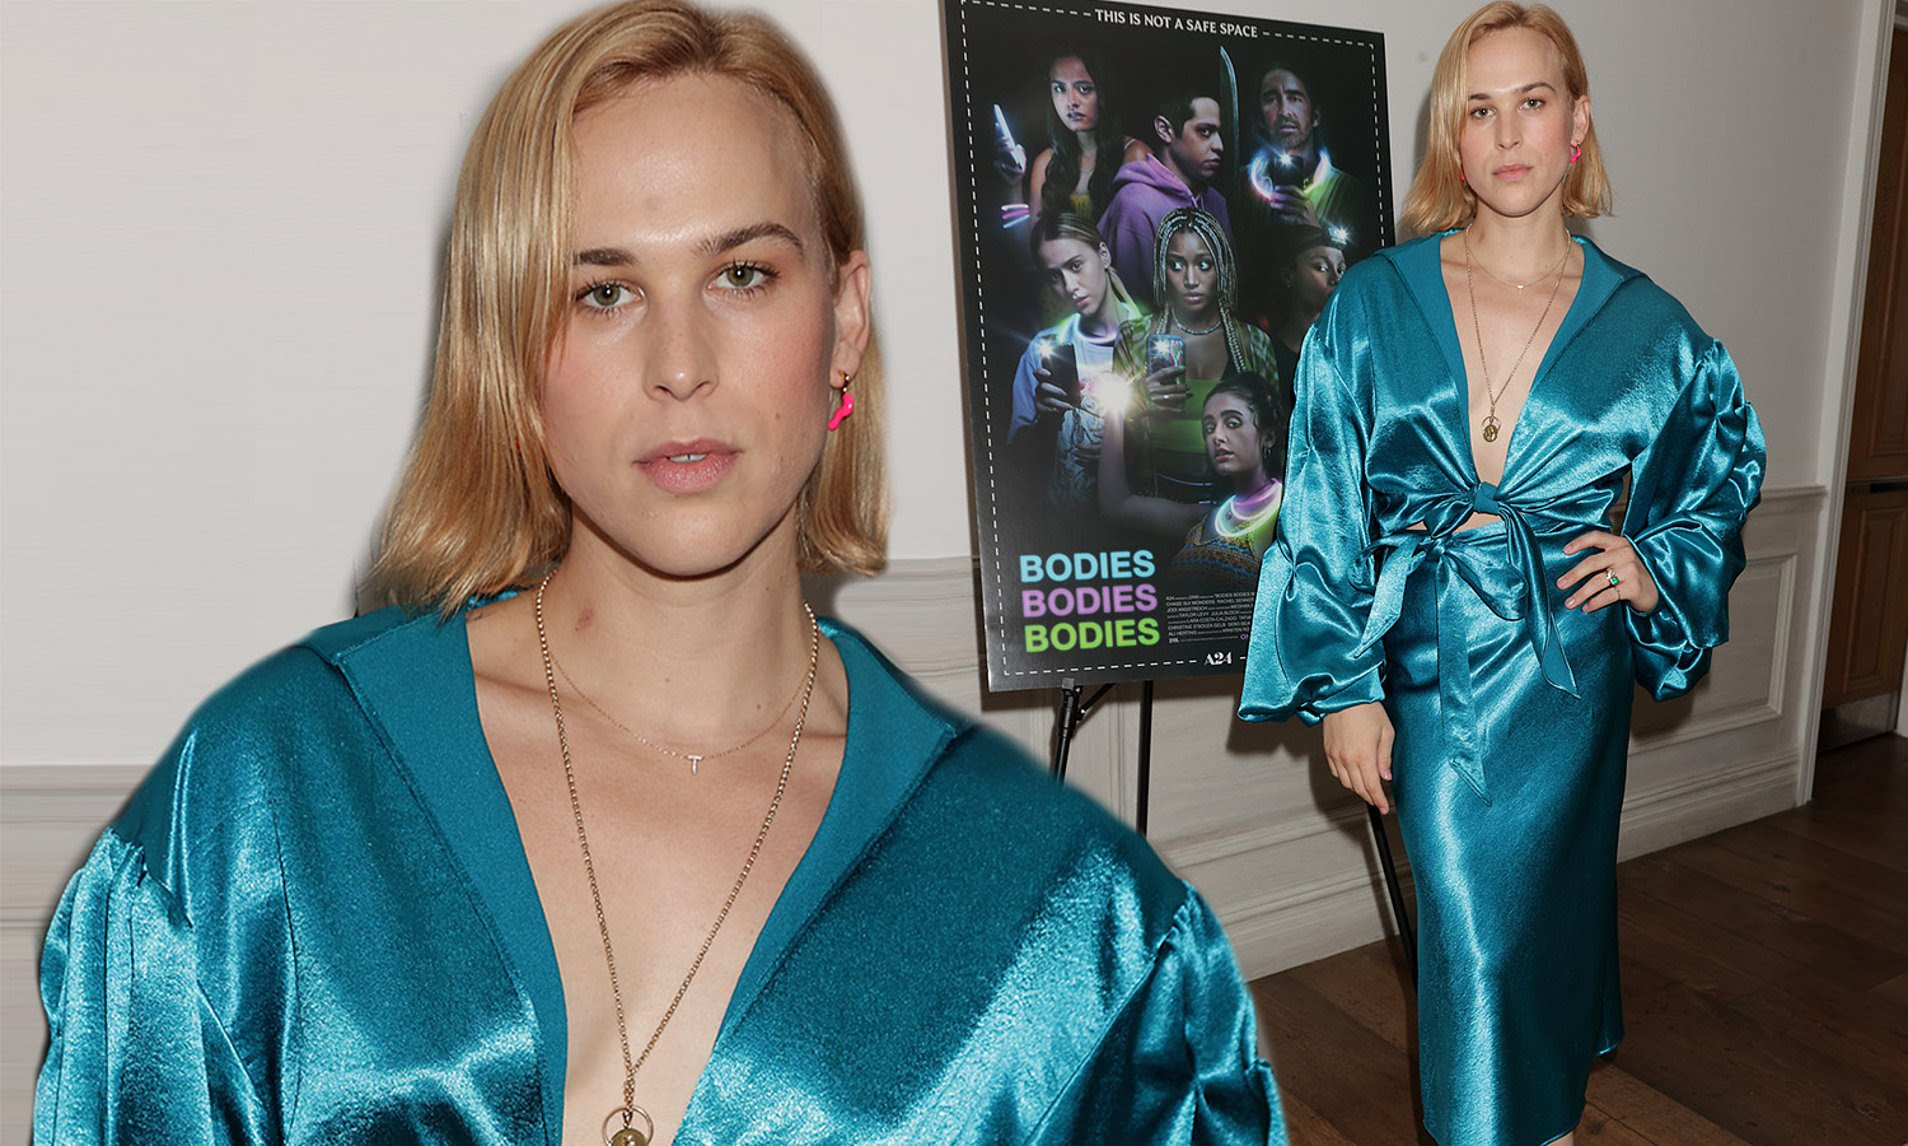 Tommy Dorfman shimmers in a metallic blue dress at Pride screening of Bodies Bodies Bodies in NYC